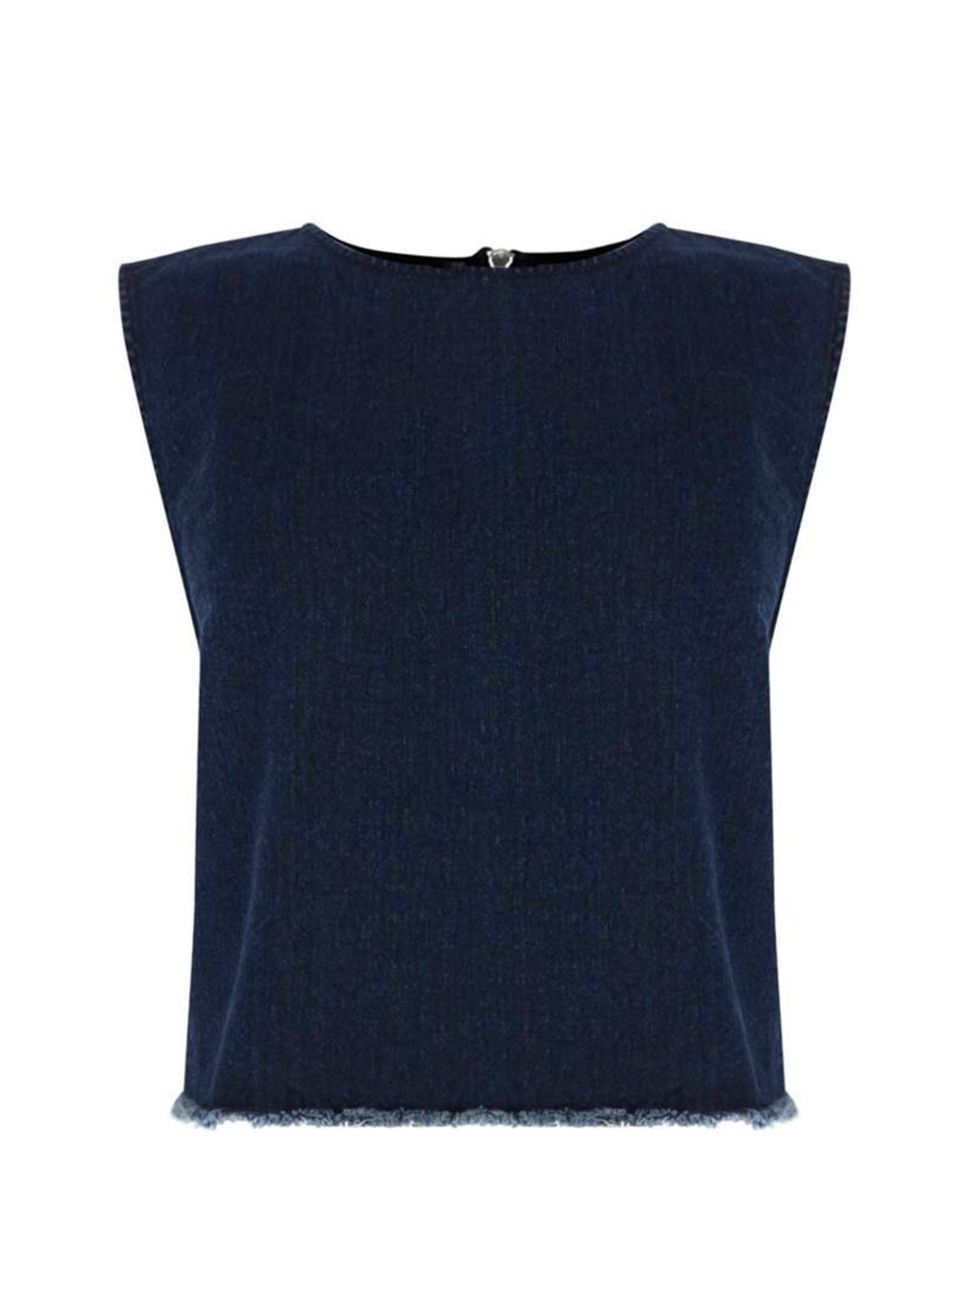 <p>Designer Phoebe Sing will tap into this season's distressed denim trend in this boxy top.</p><p><a href="http://www.warehouse.co.uk/sharp-denim-top/tops-/warehouse/fcp-product/5032985369">Warehouse</a> top, £35</p>